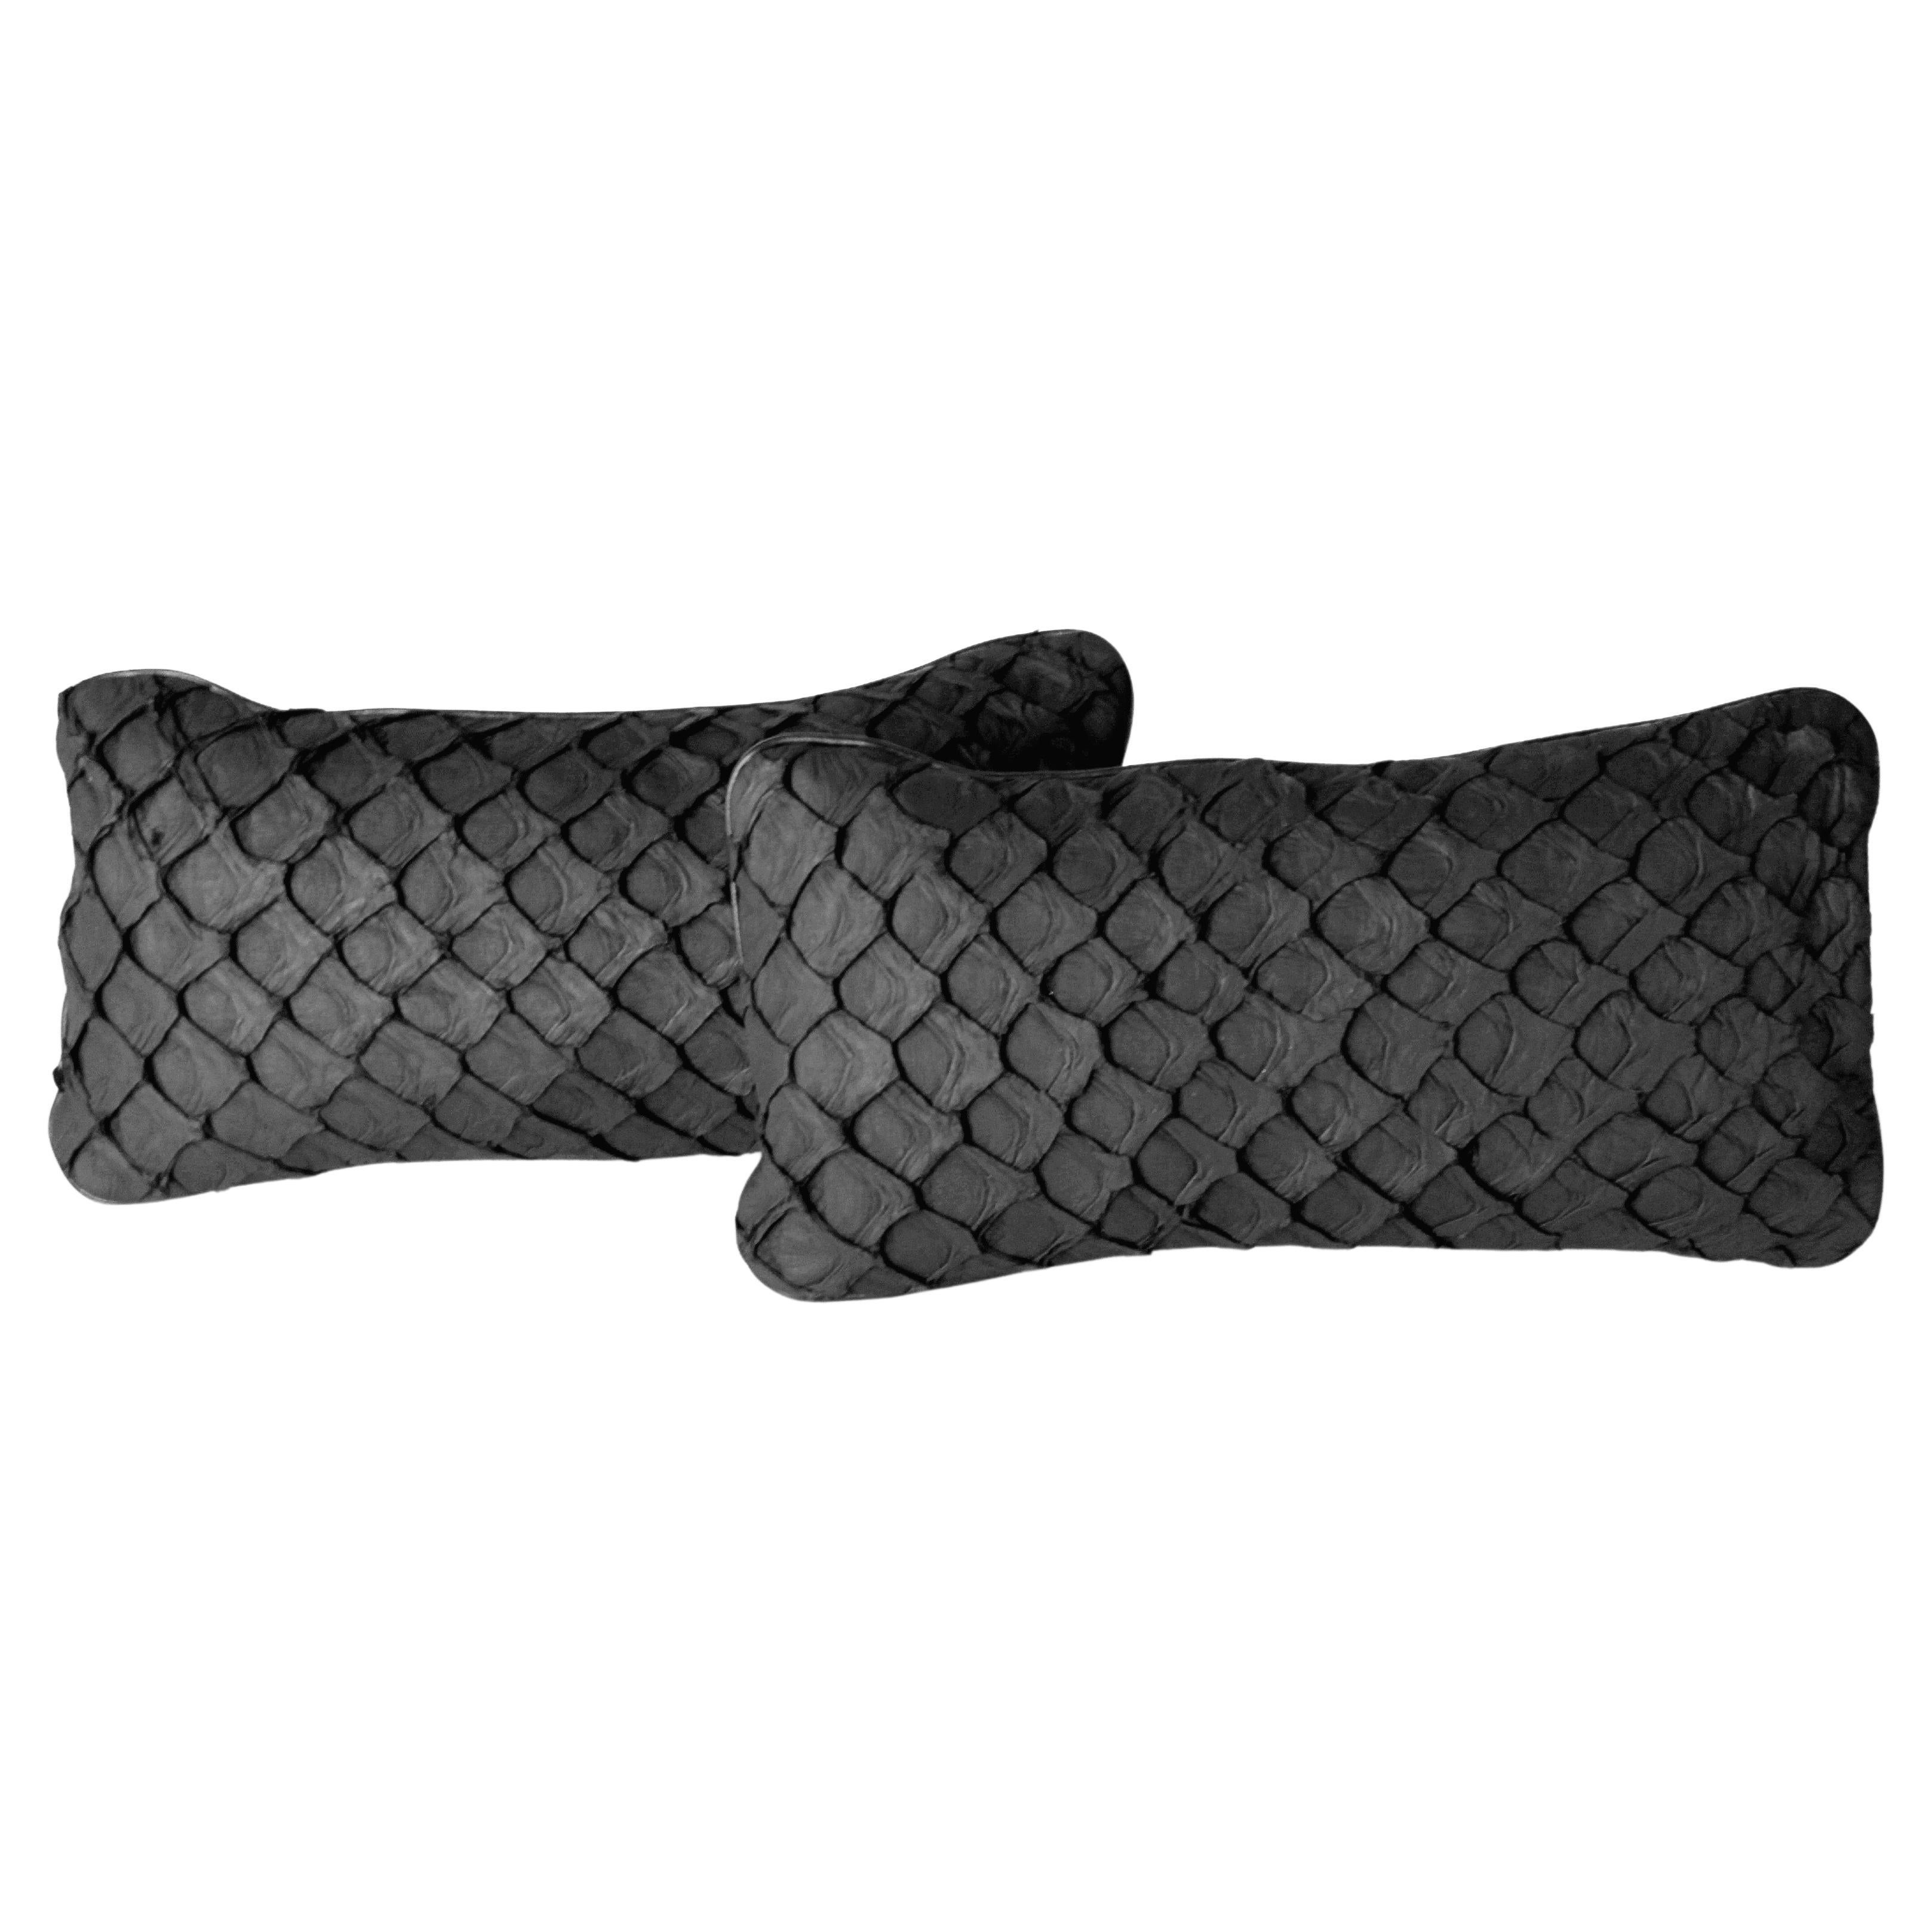 Set of 2 Leather Cushion, Exclusive Fish Leather Black Color